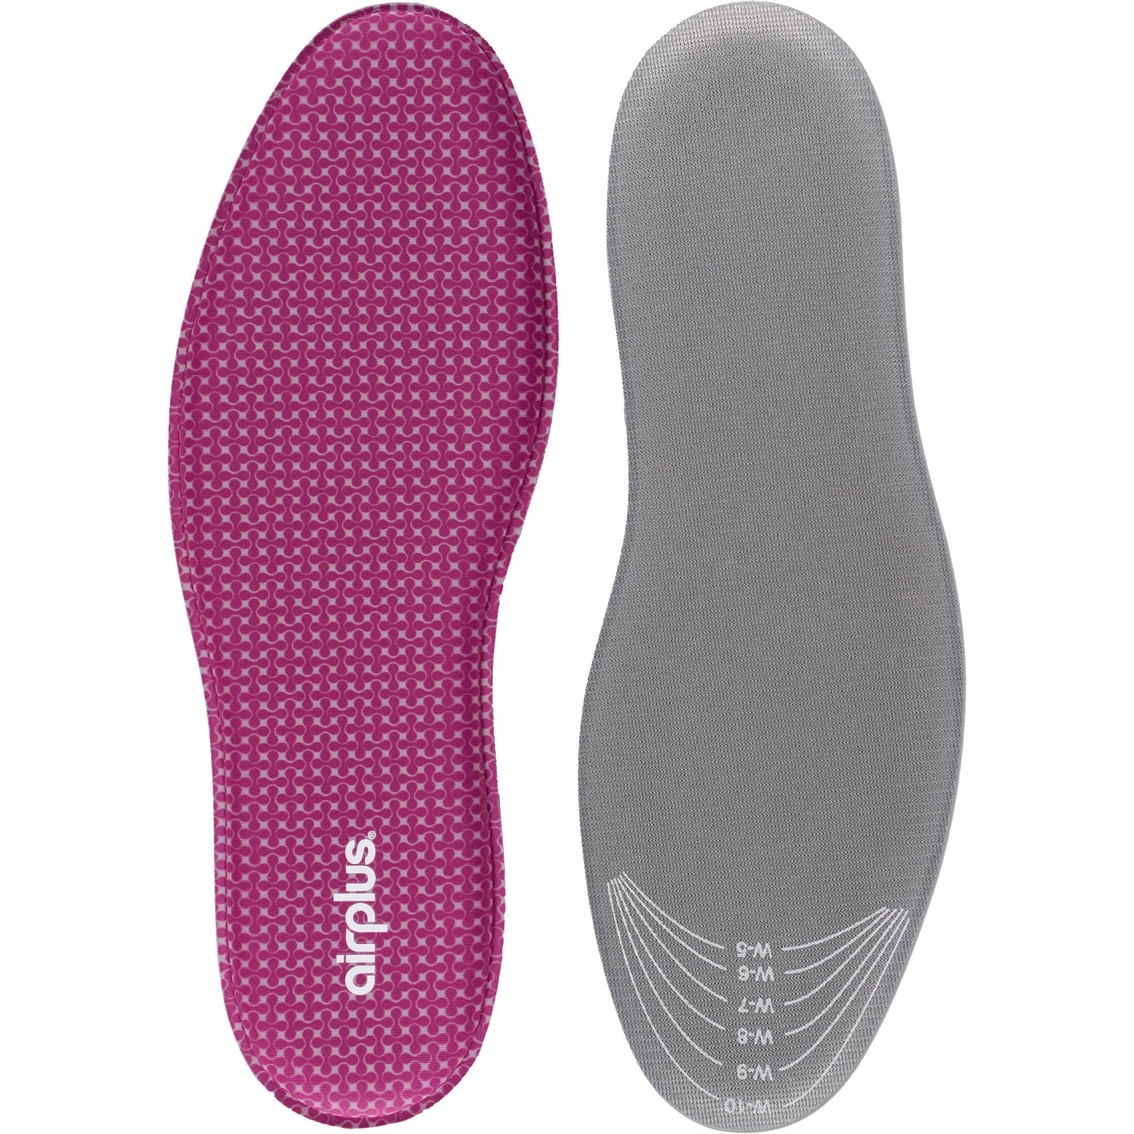 Airplus Women's Memory Comfort Shoe Insoles for Pressure Relief, Size 7 to 13 - Image 3 of 7